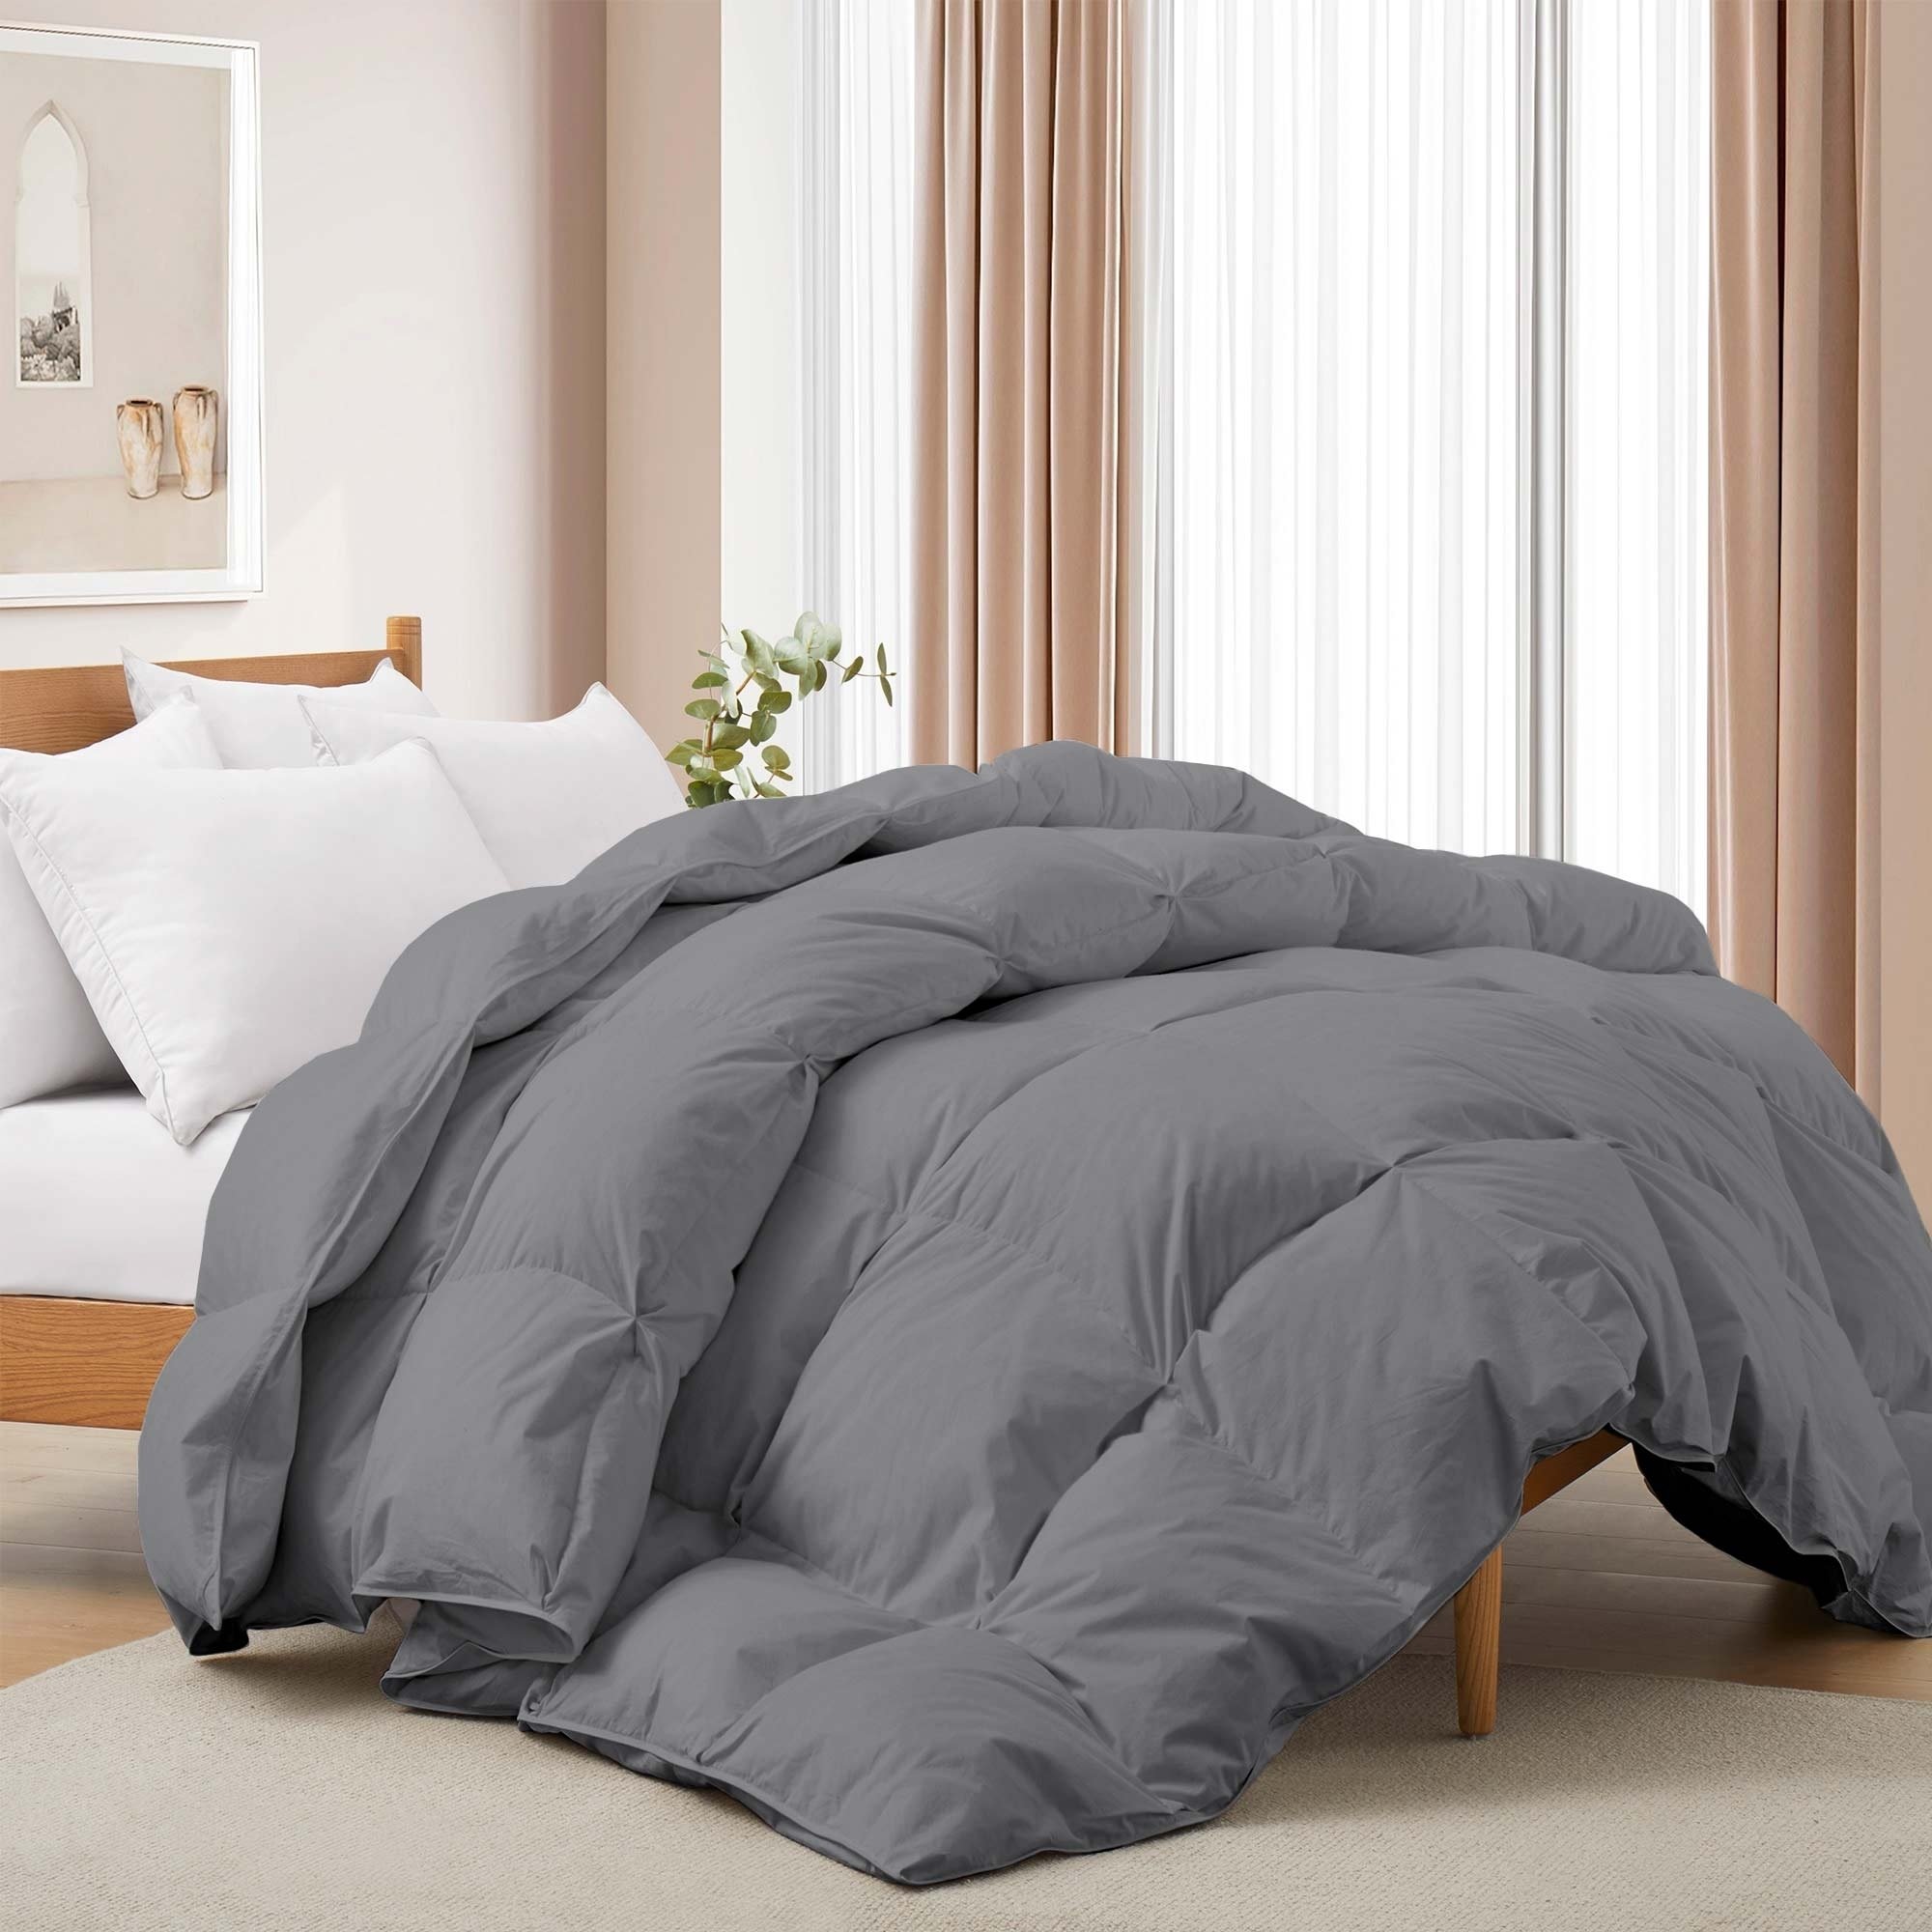 All Seasons Pinch Pleat Goose Feather And Down Comforter-Breathable Cotton Fabric Baffled Box Duvet Insert - Charcoal Gray, King